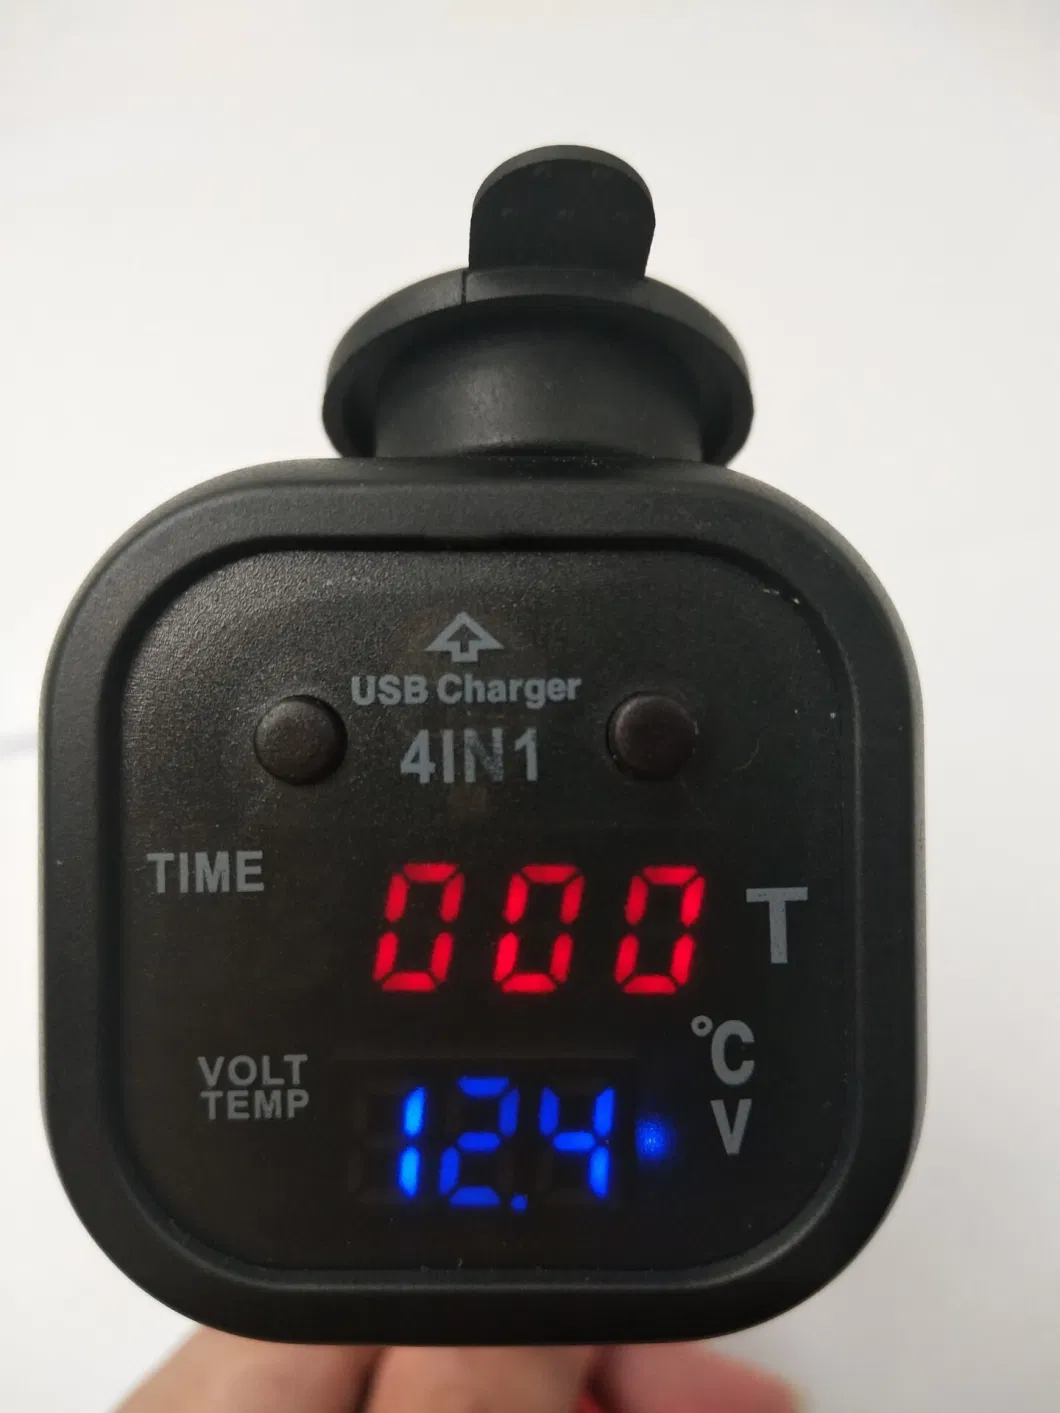 12V-24V Universal 4 in 1 Car Time Date Digital Thermometer Voltage Detector Charger Display